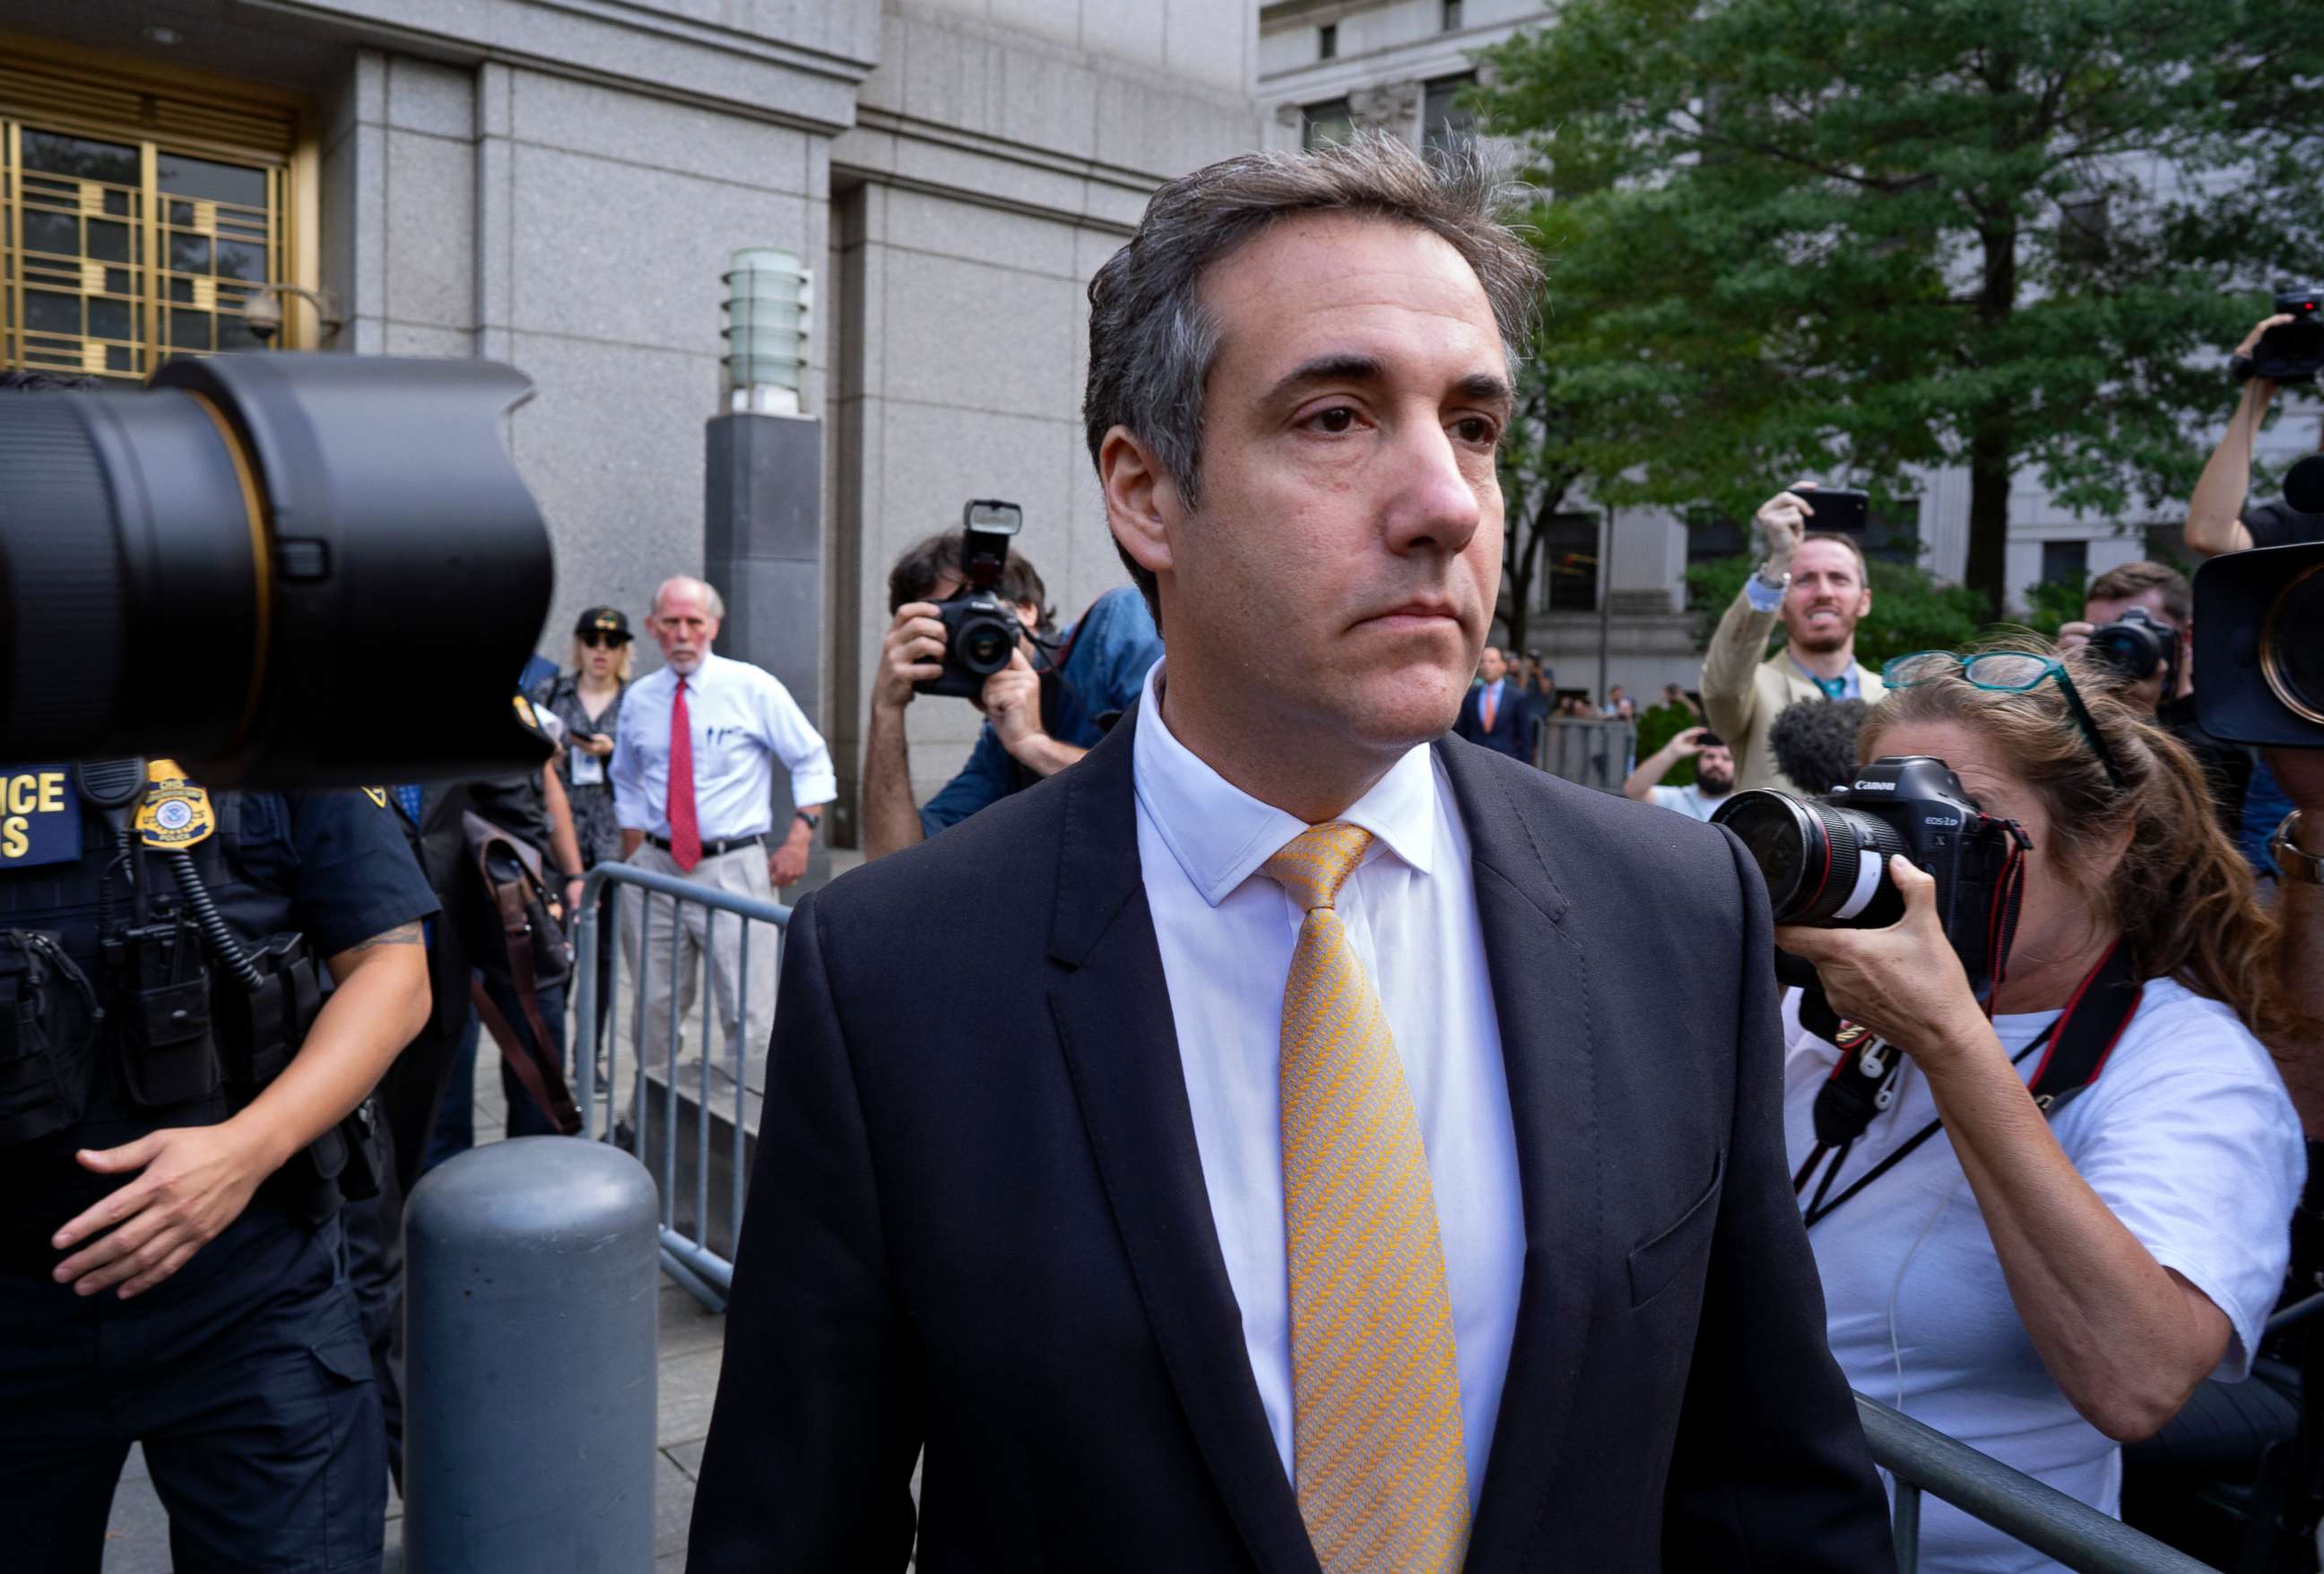 PHOTO: Michael Cohen, the former personal lawyer to President Donald Trump, leaves federal court after reaching a plea agreement in New York, Aug. 21, 2018.